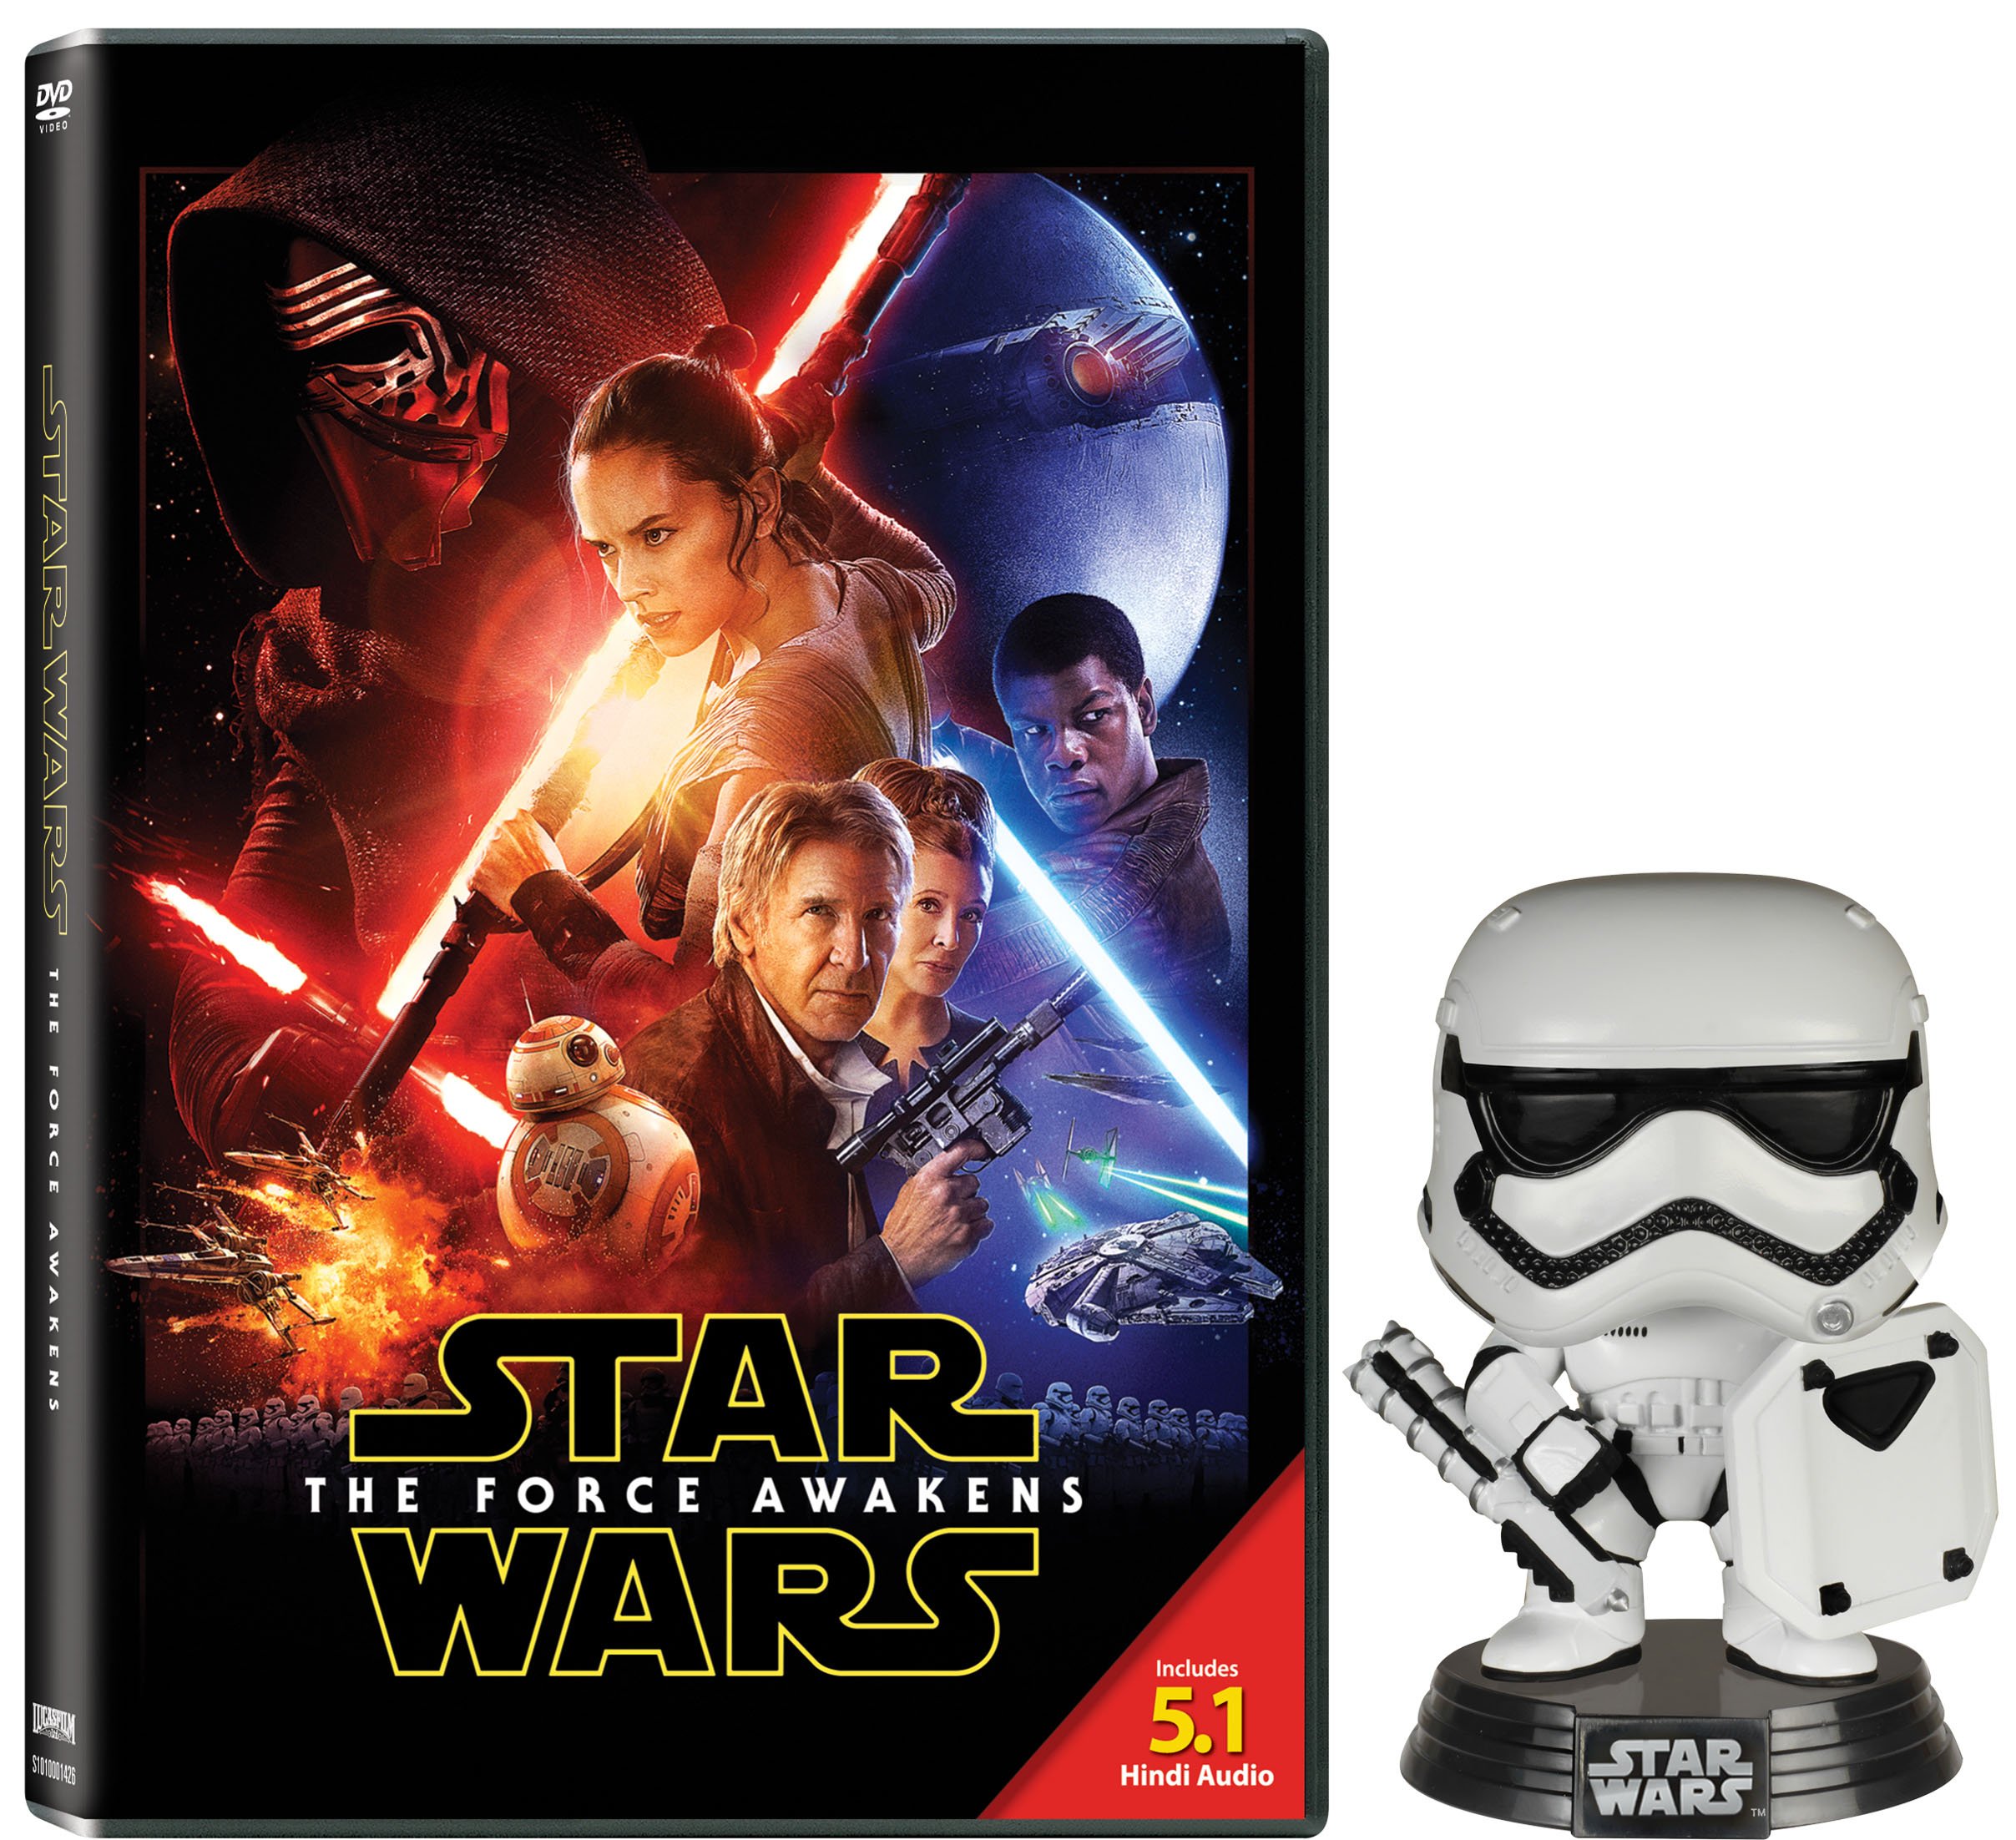 star-wars-the-force-awakens-with-storm-trooper-bobble-head-movie-purc